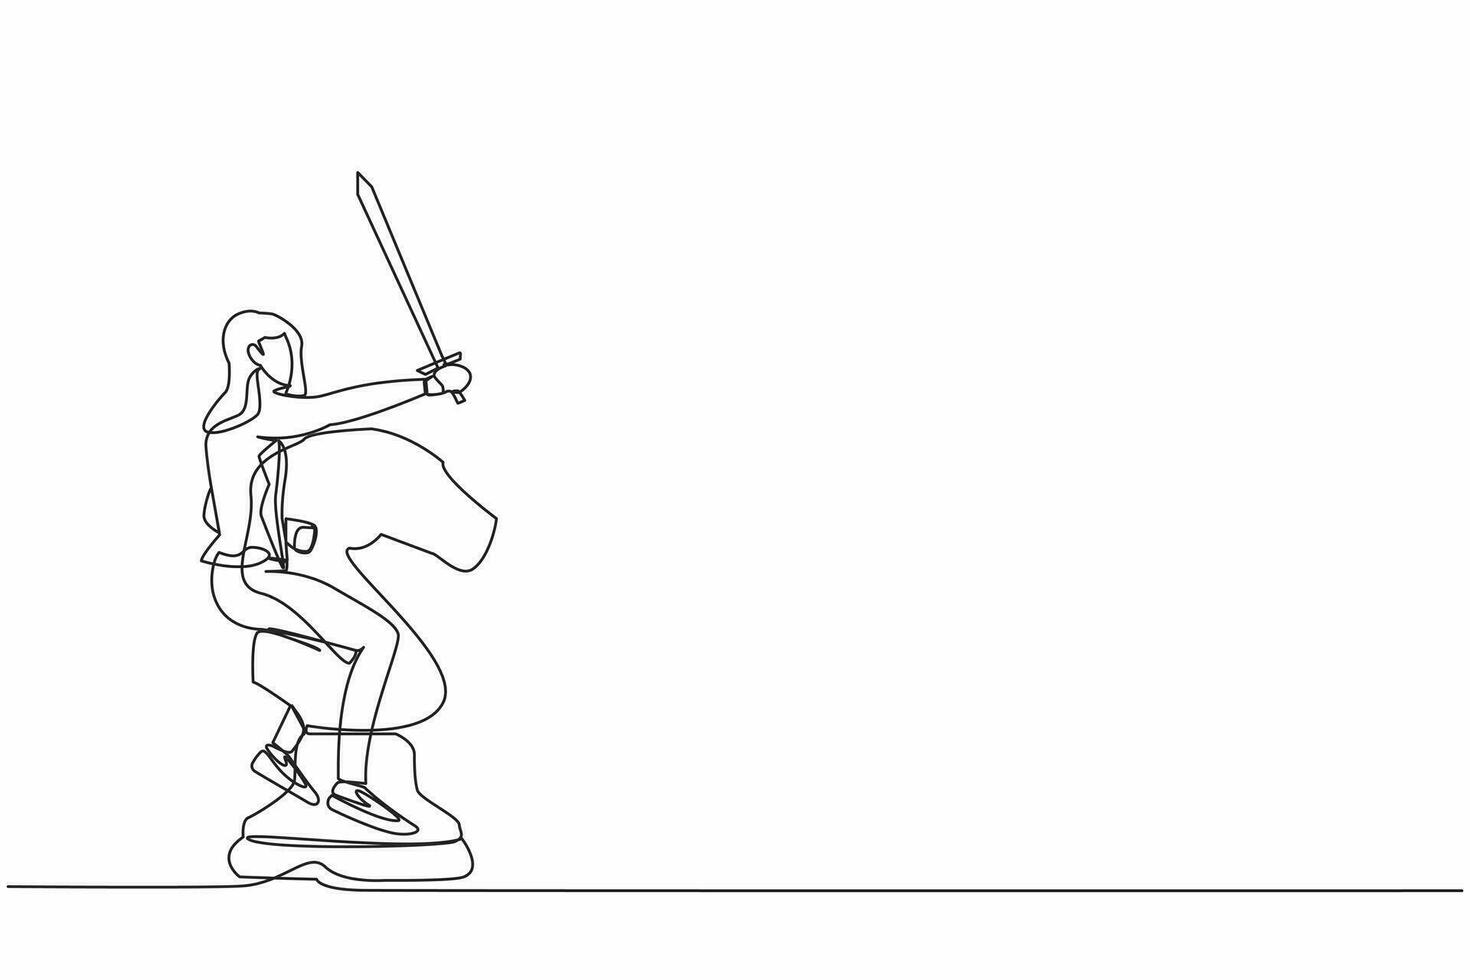 Continuous one line drawing competitive businesswoman riding big horse chess piece with sword. Business challenge for winning competition, achievement goal. Single line draw design vector illustration